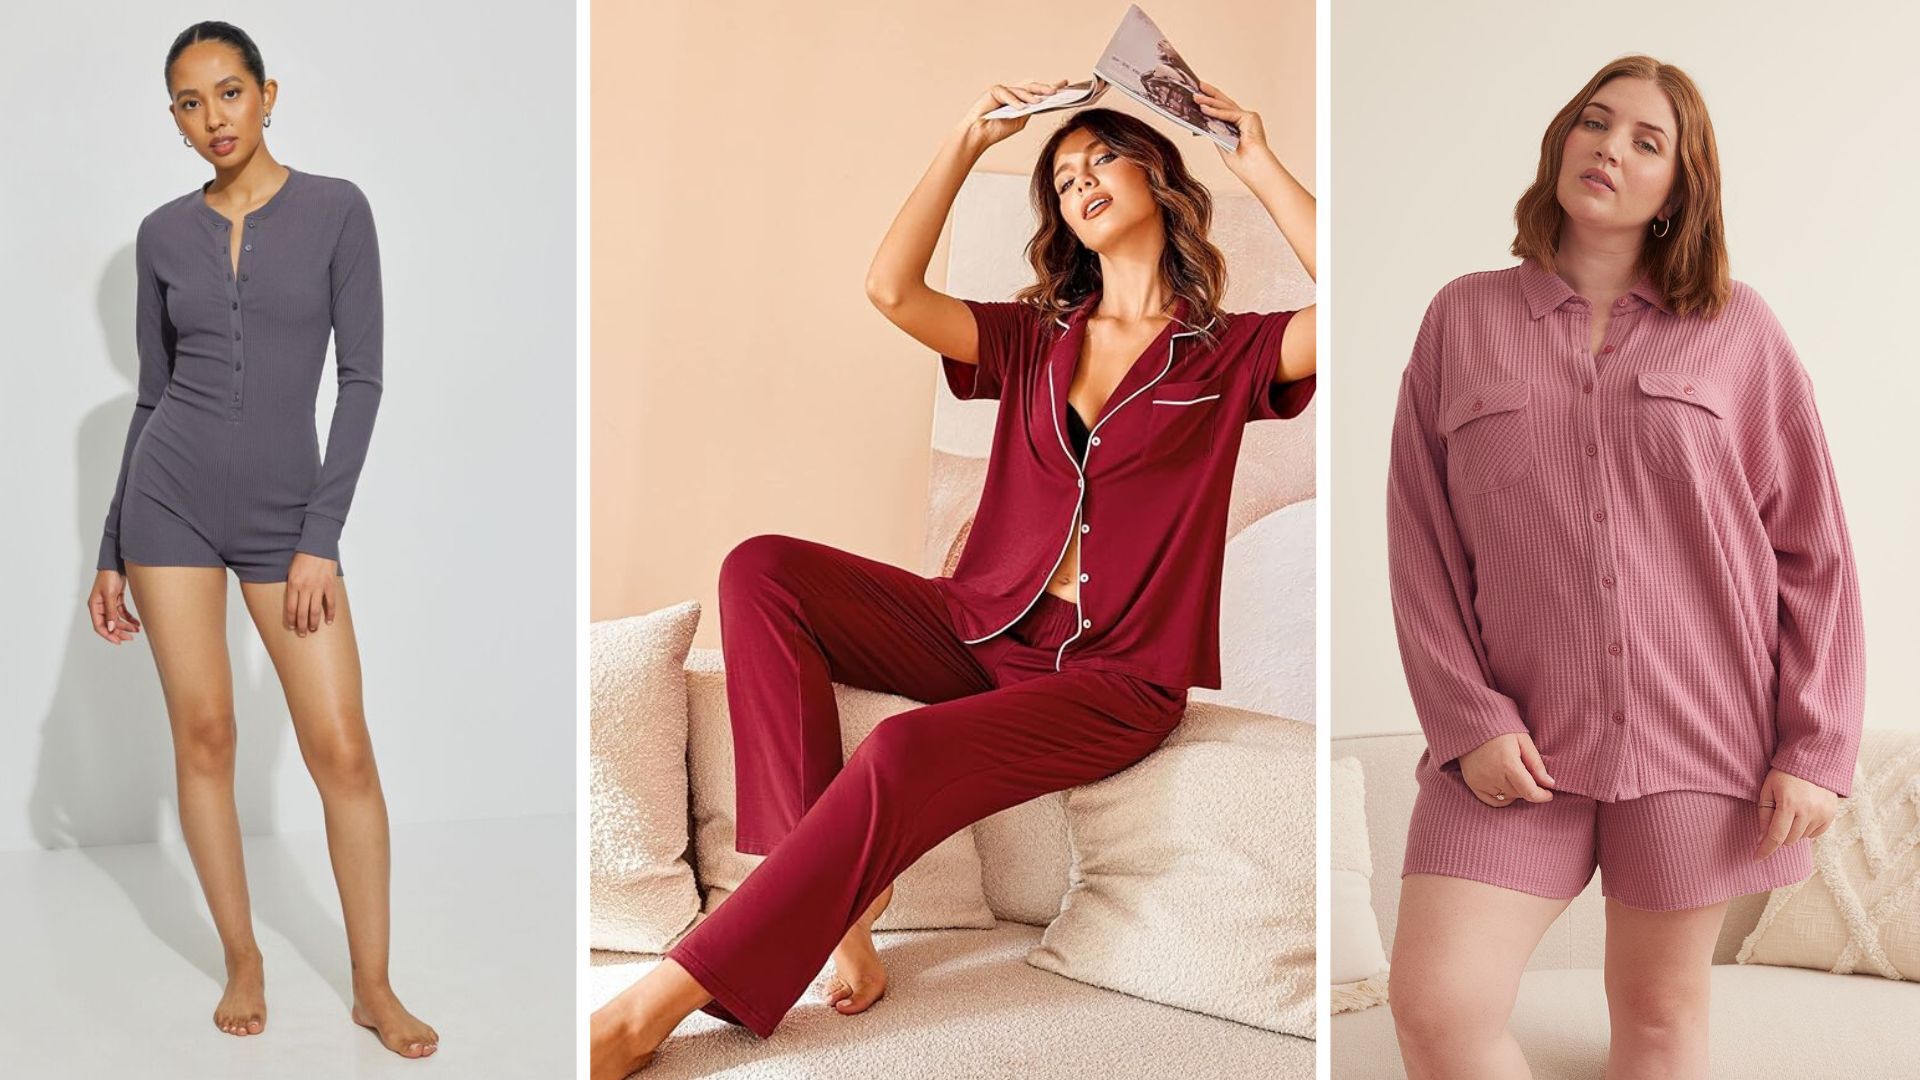 11 Of The Best Pyjama Sets and Separates To Get Cozy In This Winter